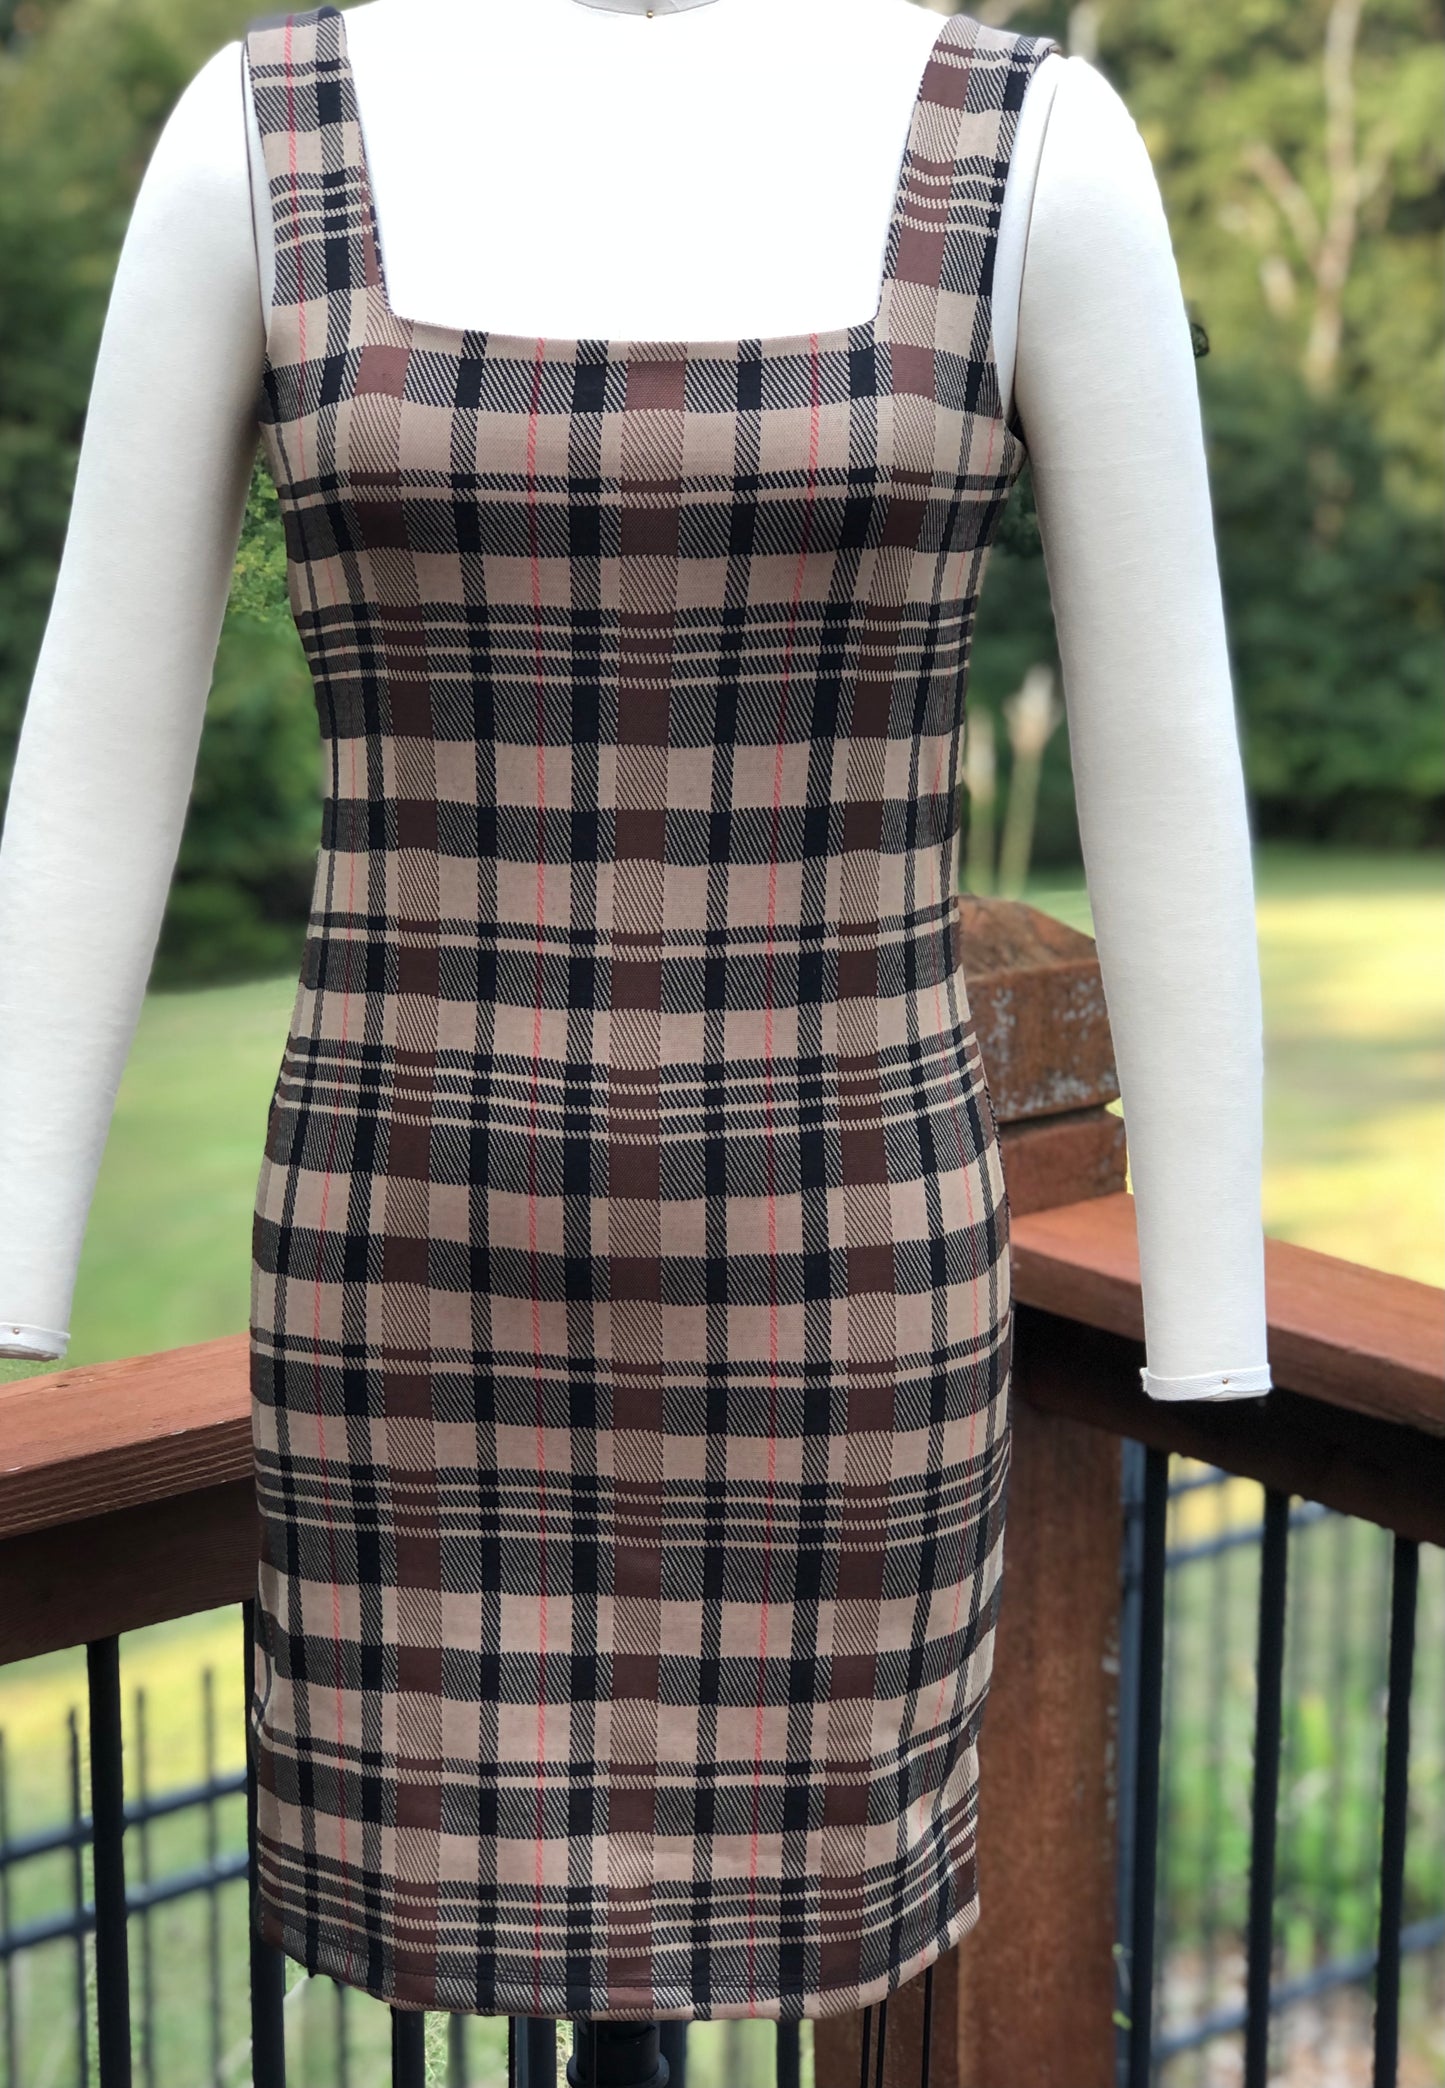 Beige, Brown and Black Plaid Dress - Size 8/10 - Only ONE Available